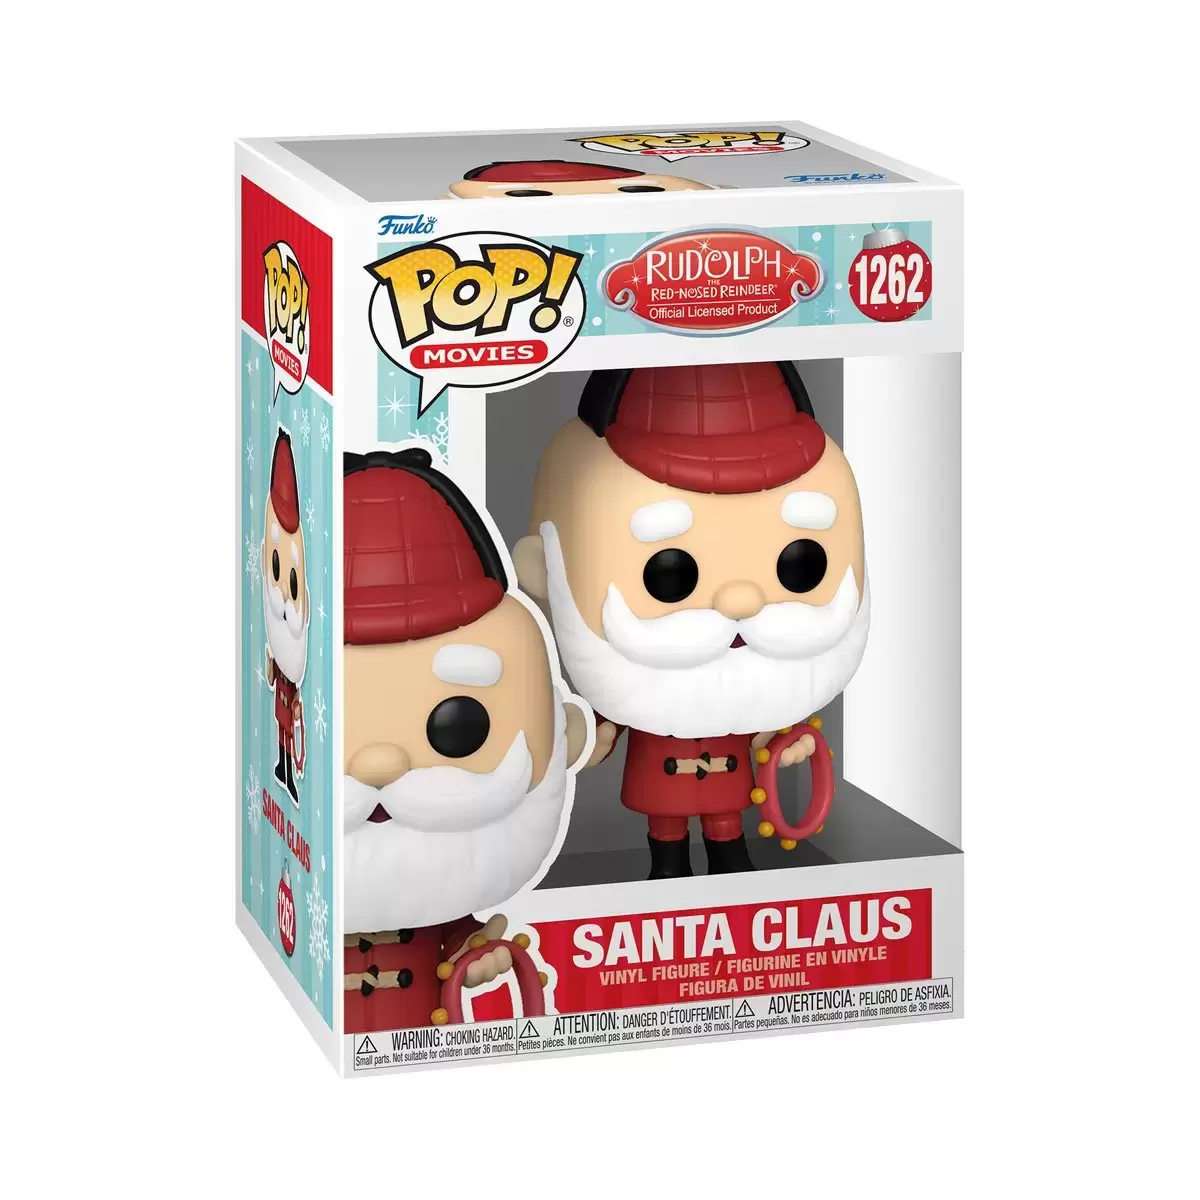 POP! Movies - Rudolph the Red-Nosed Reindeer - Santa Claus